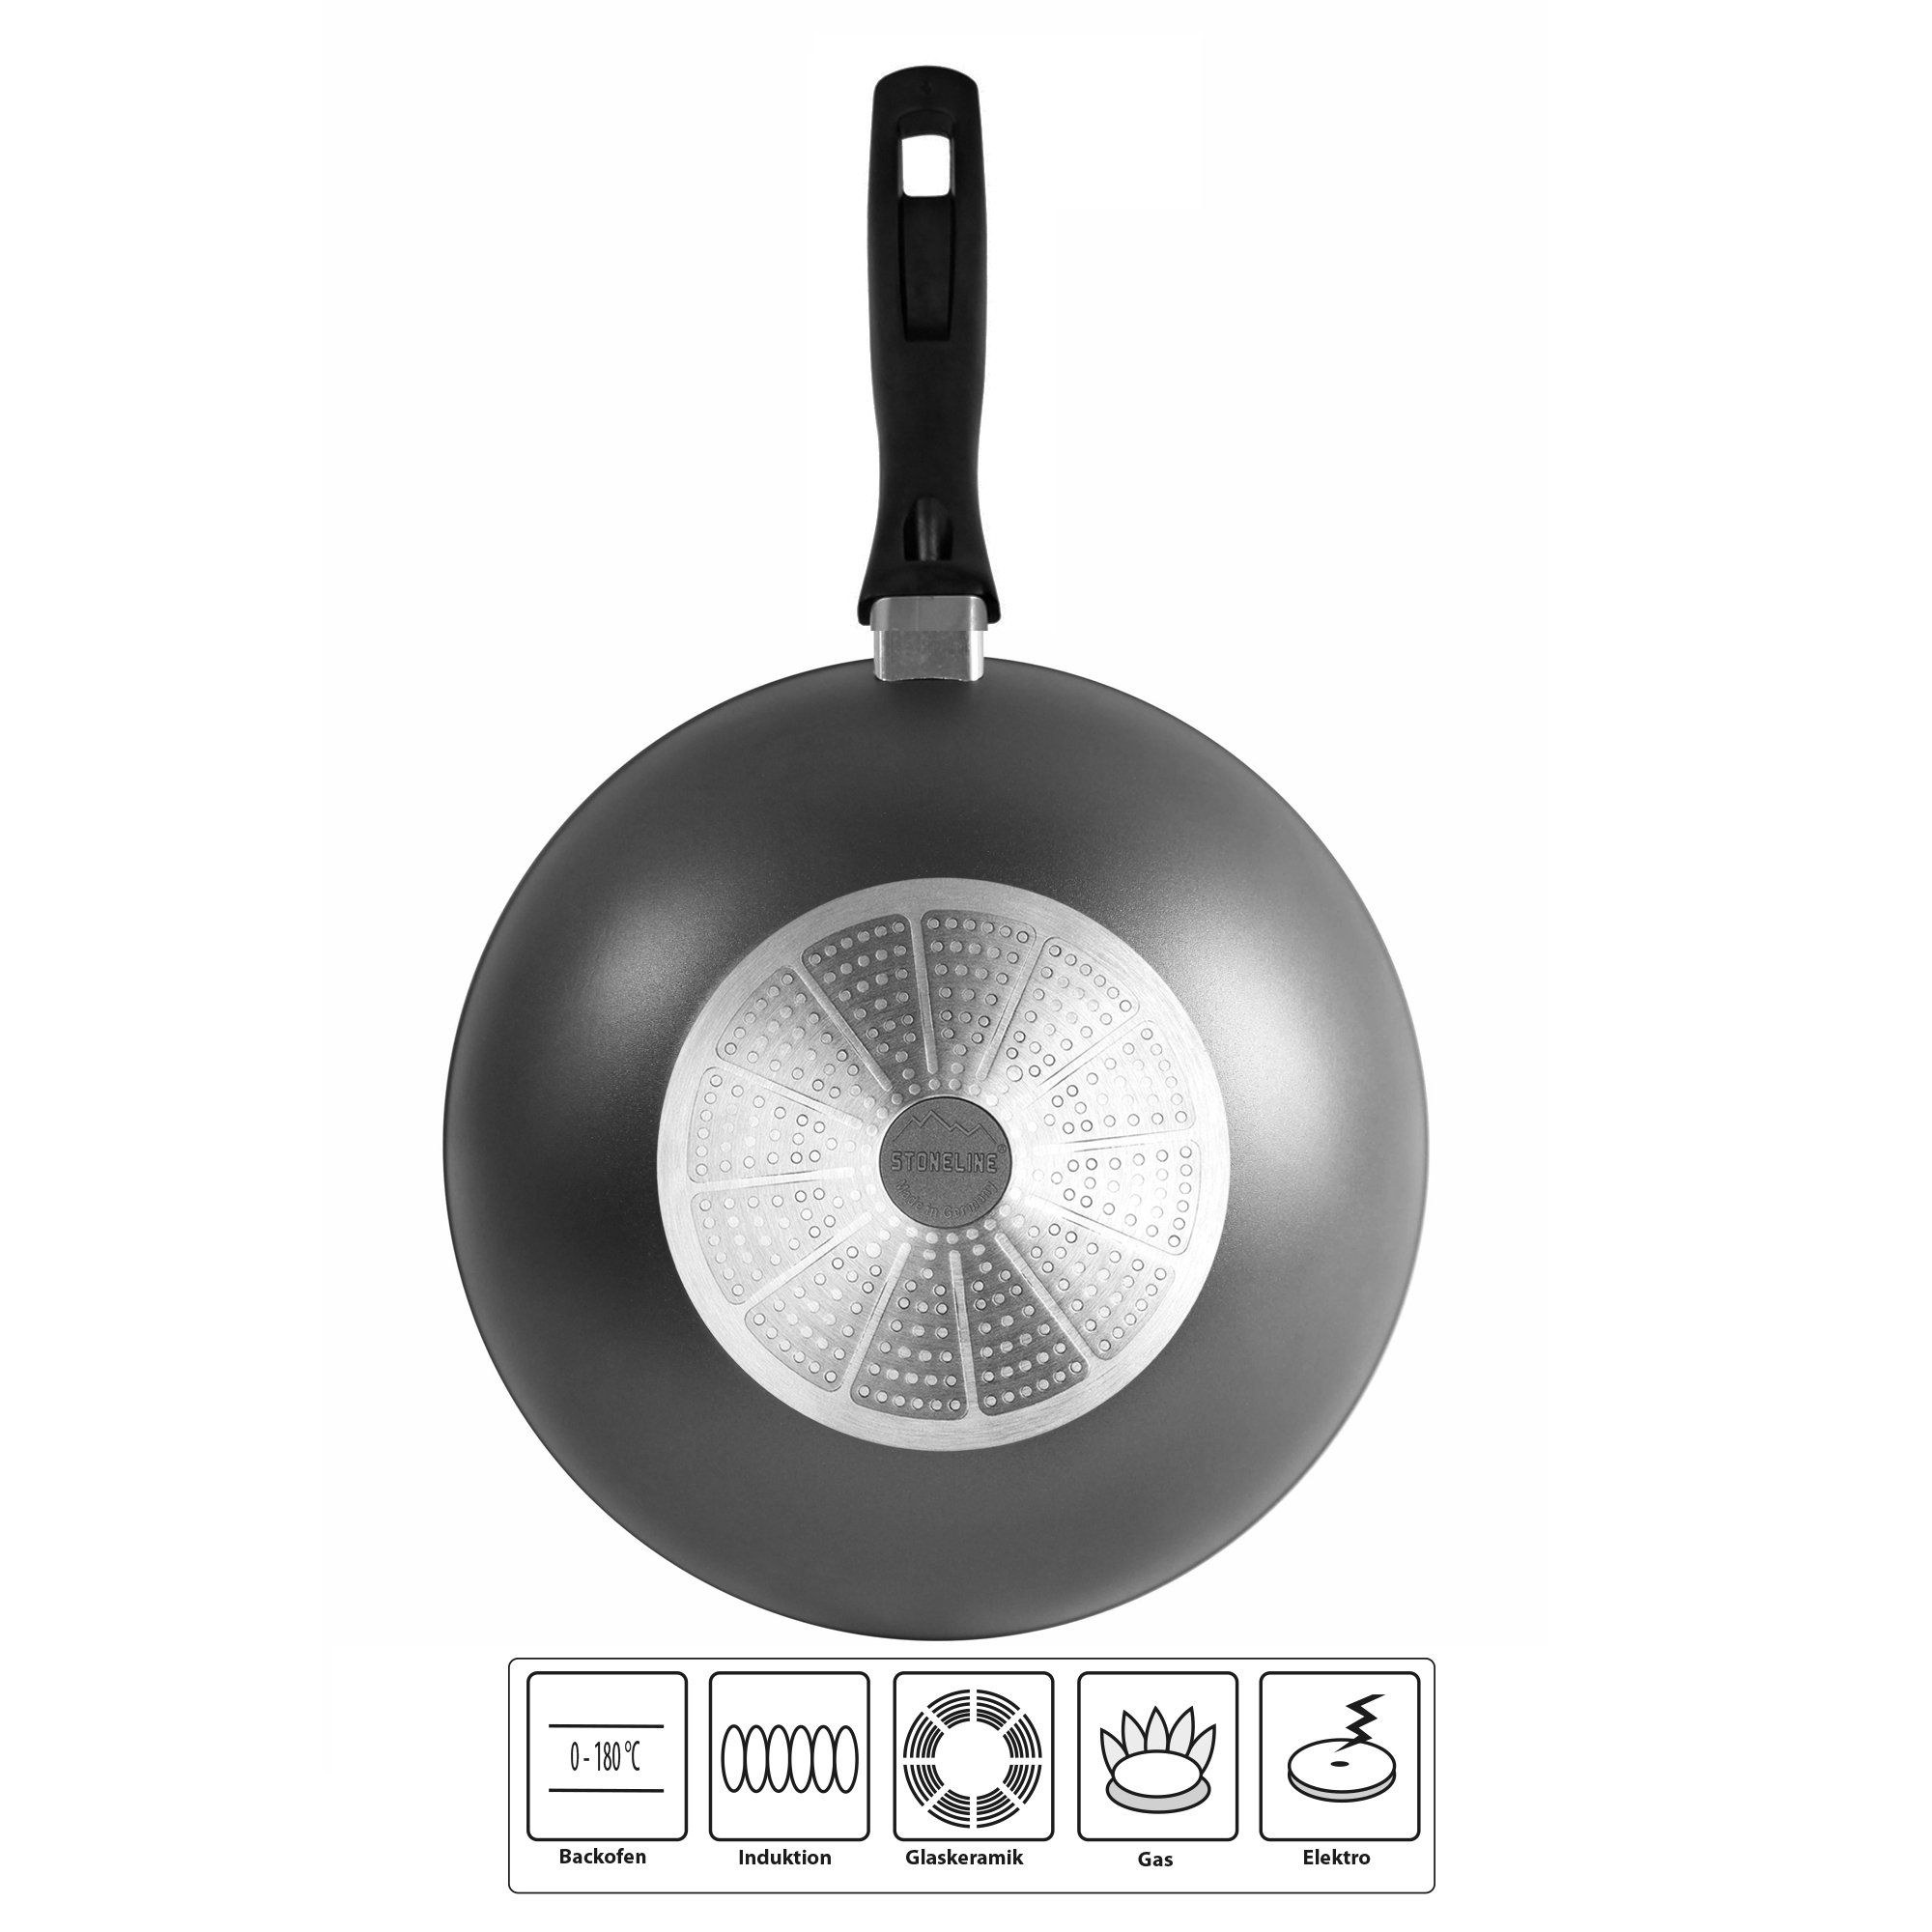 STONELINE® wok pan 30cm, Made in Germany, wok non-stick coated, suitable for induction